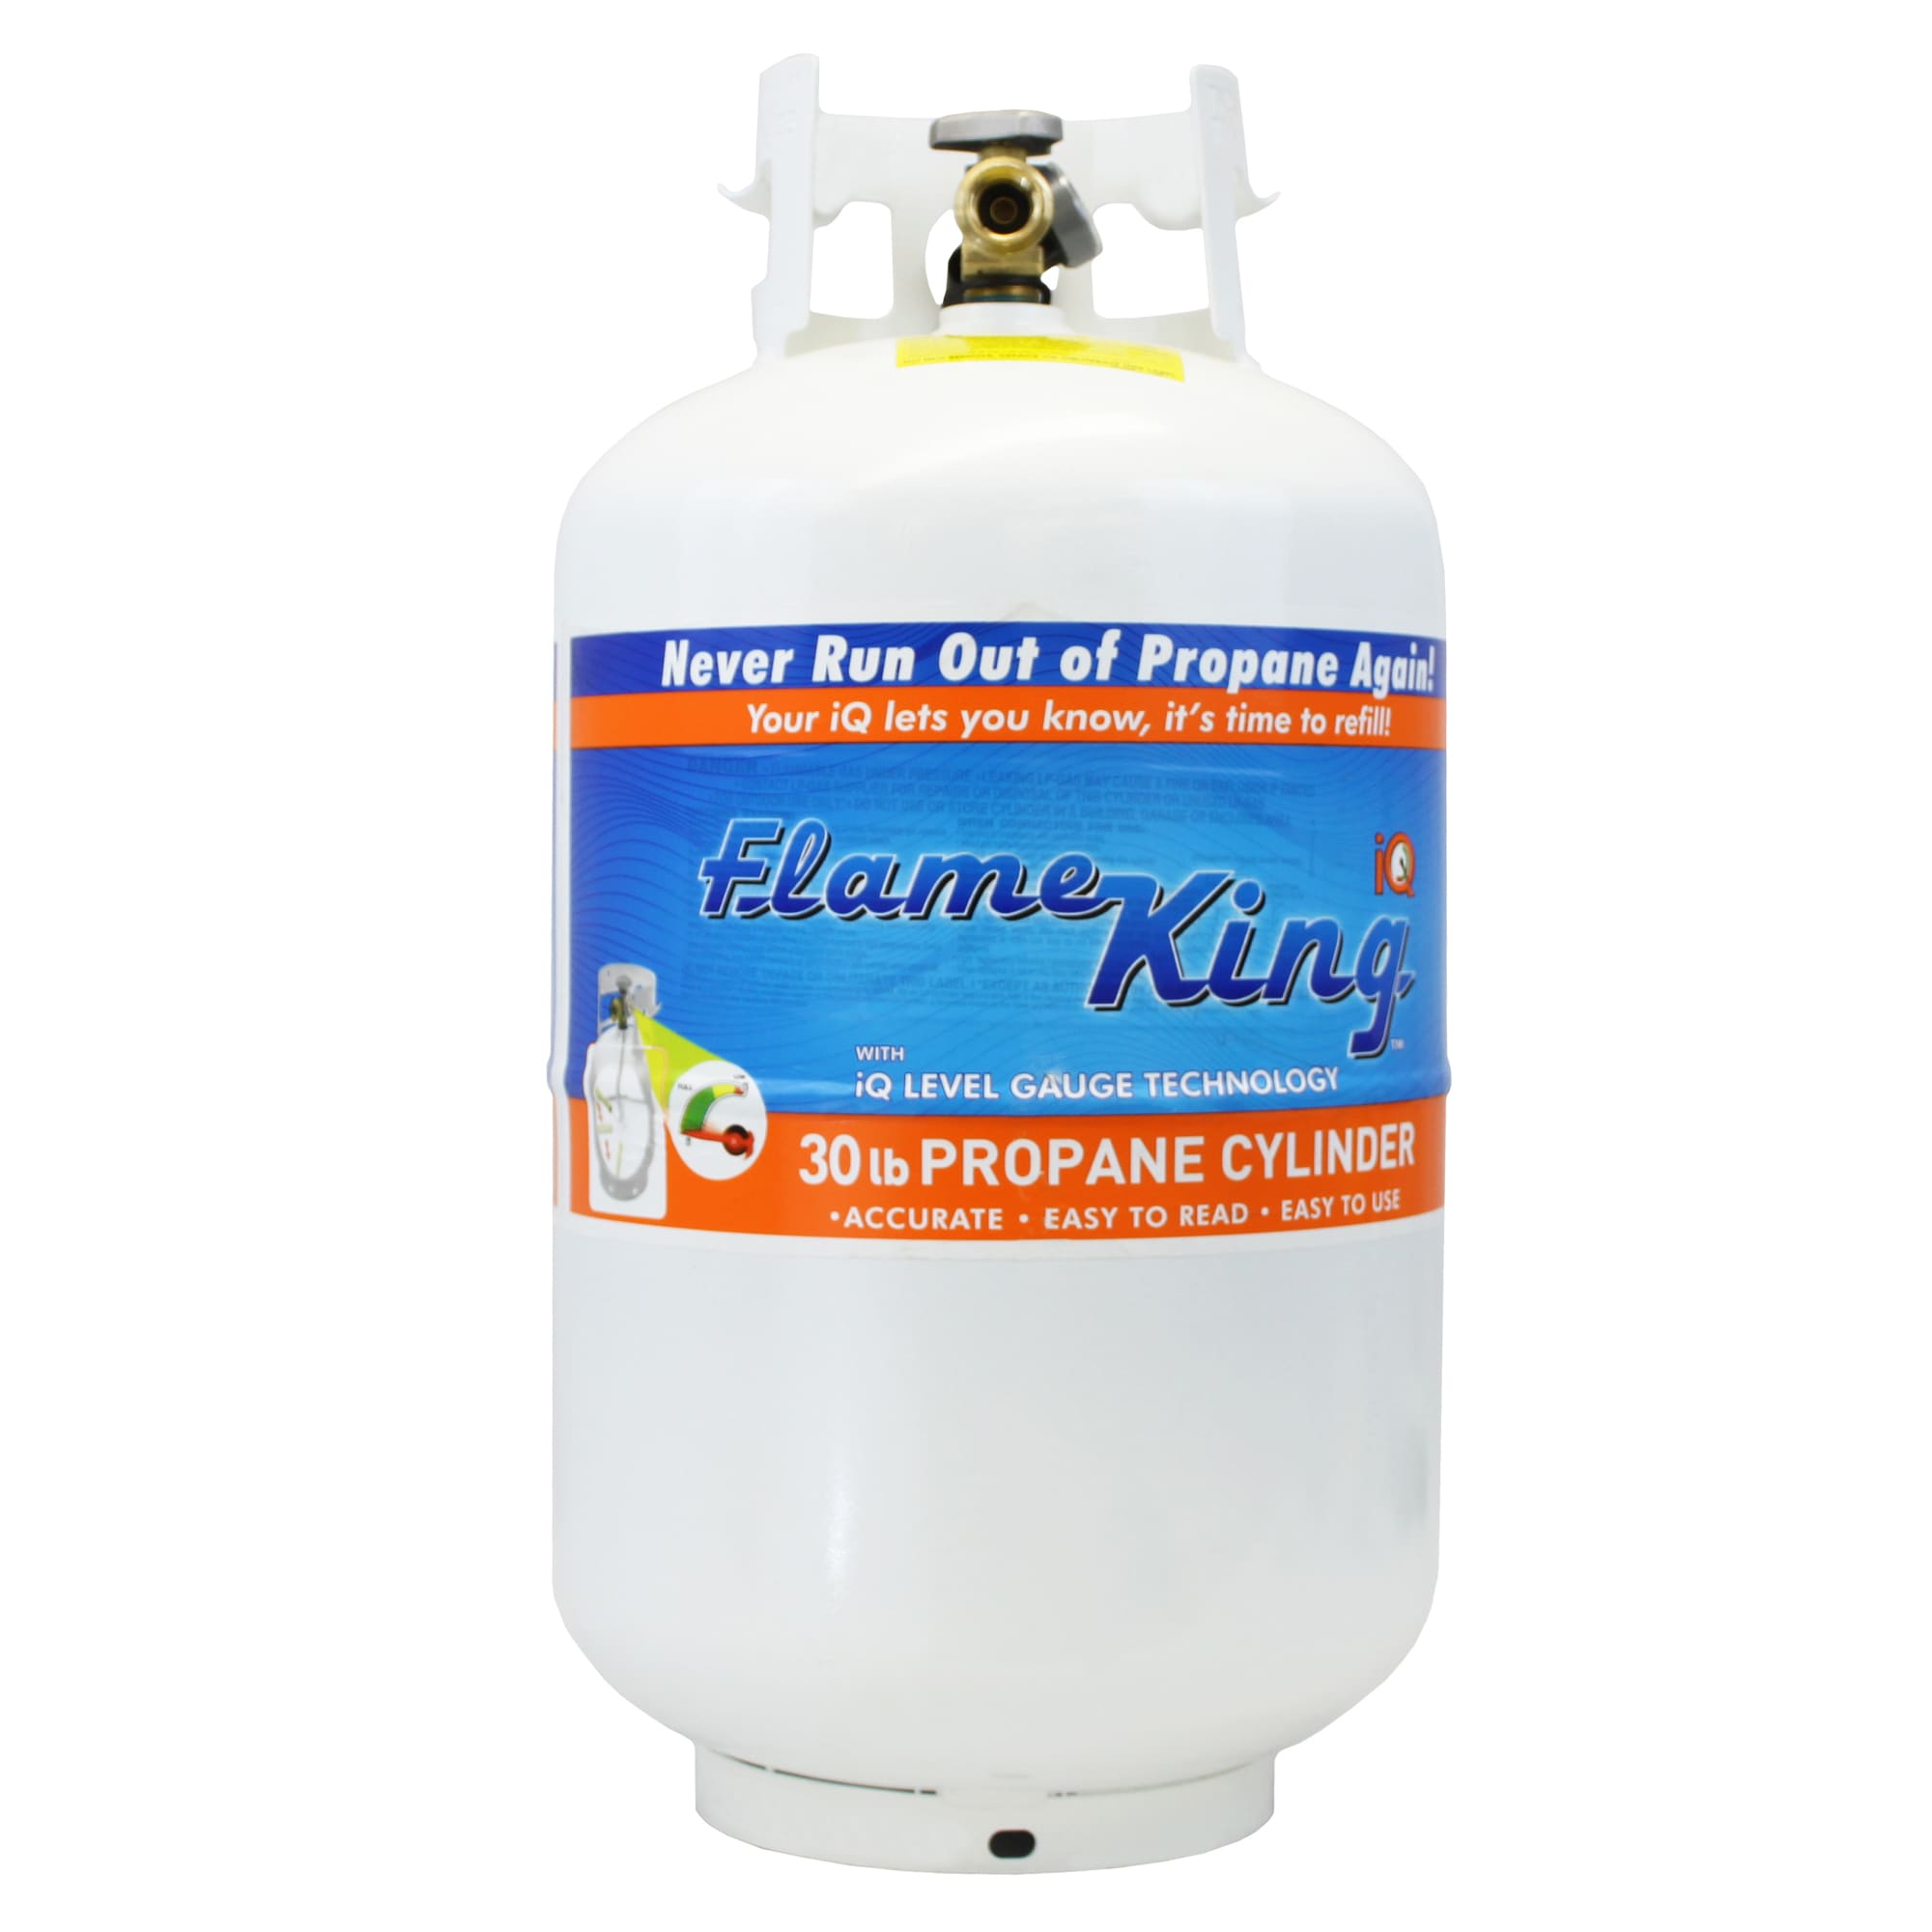 Bernzomatic 1 lb. All-Purpose Propane Gas Cylinder 327774 - The Home Depot